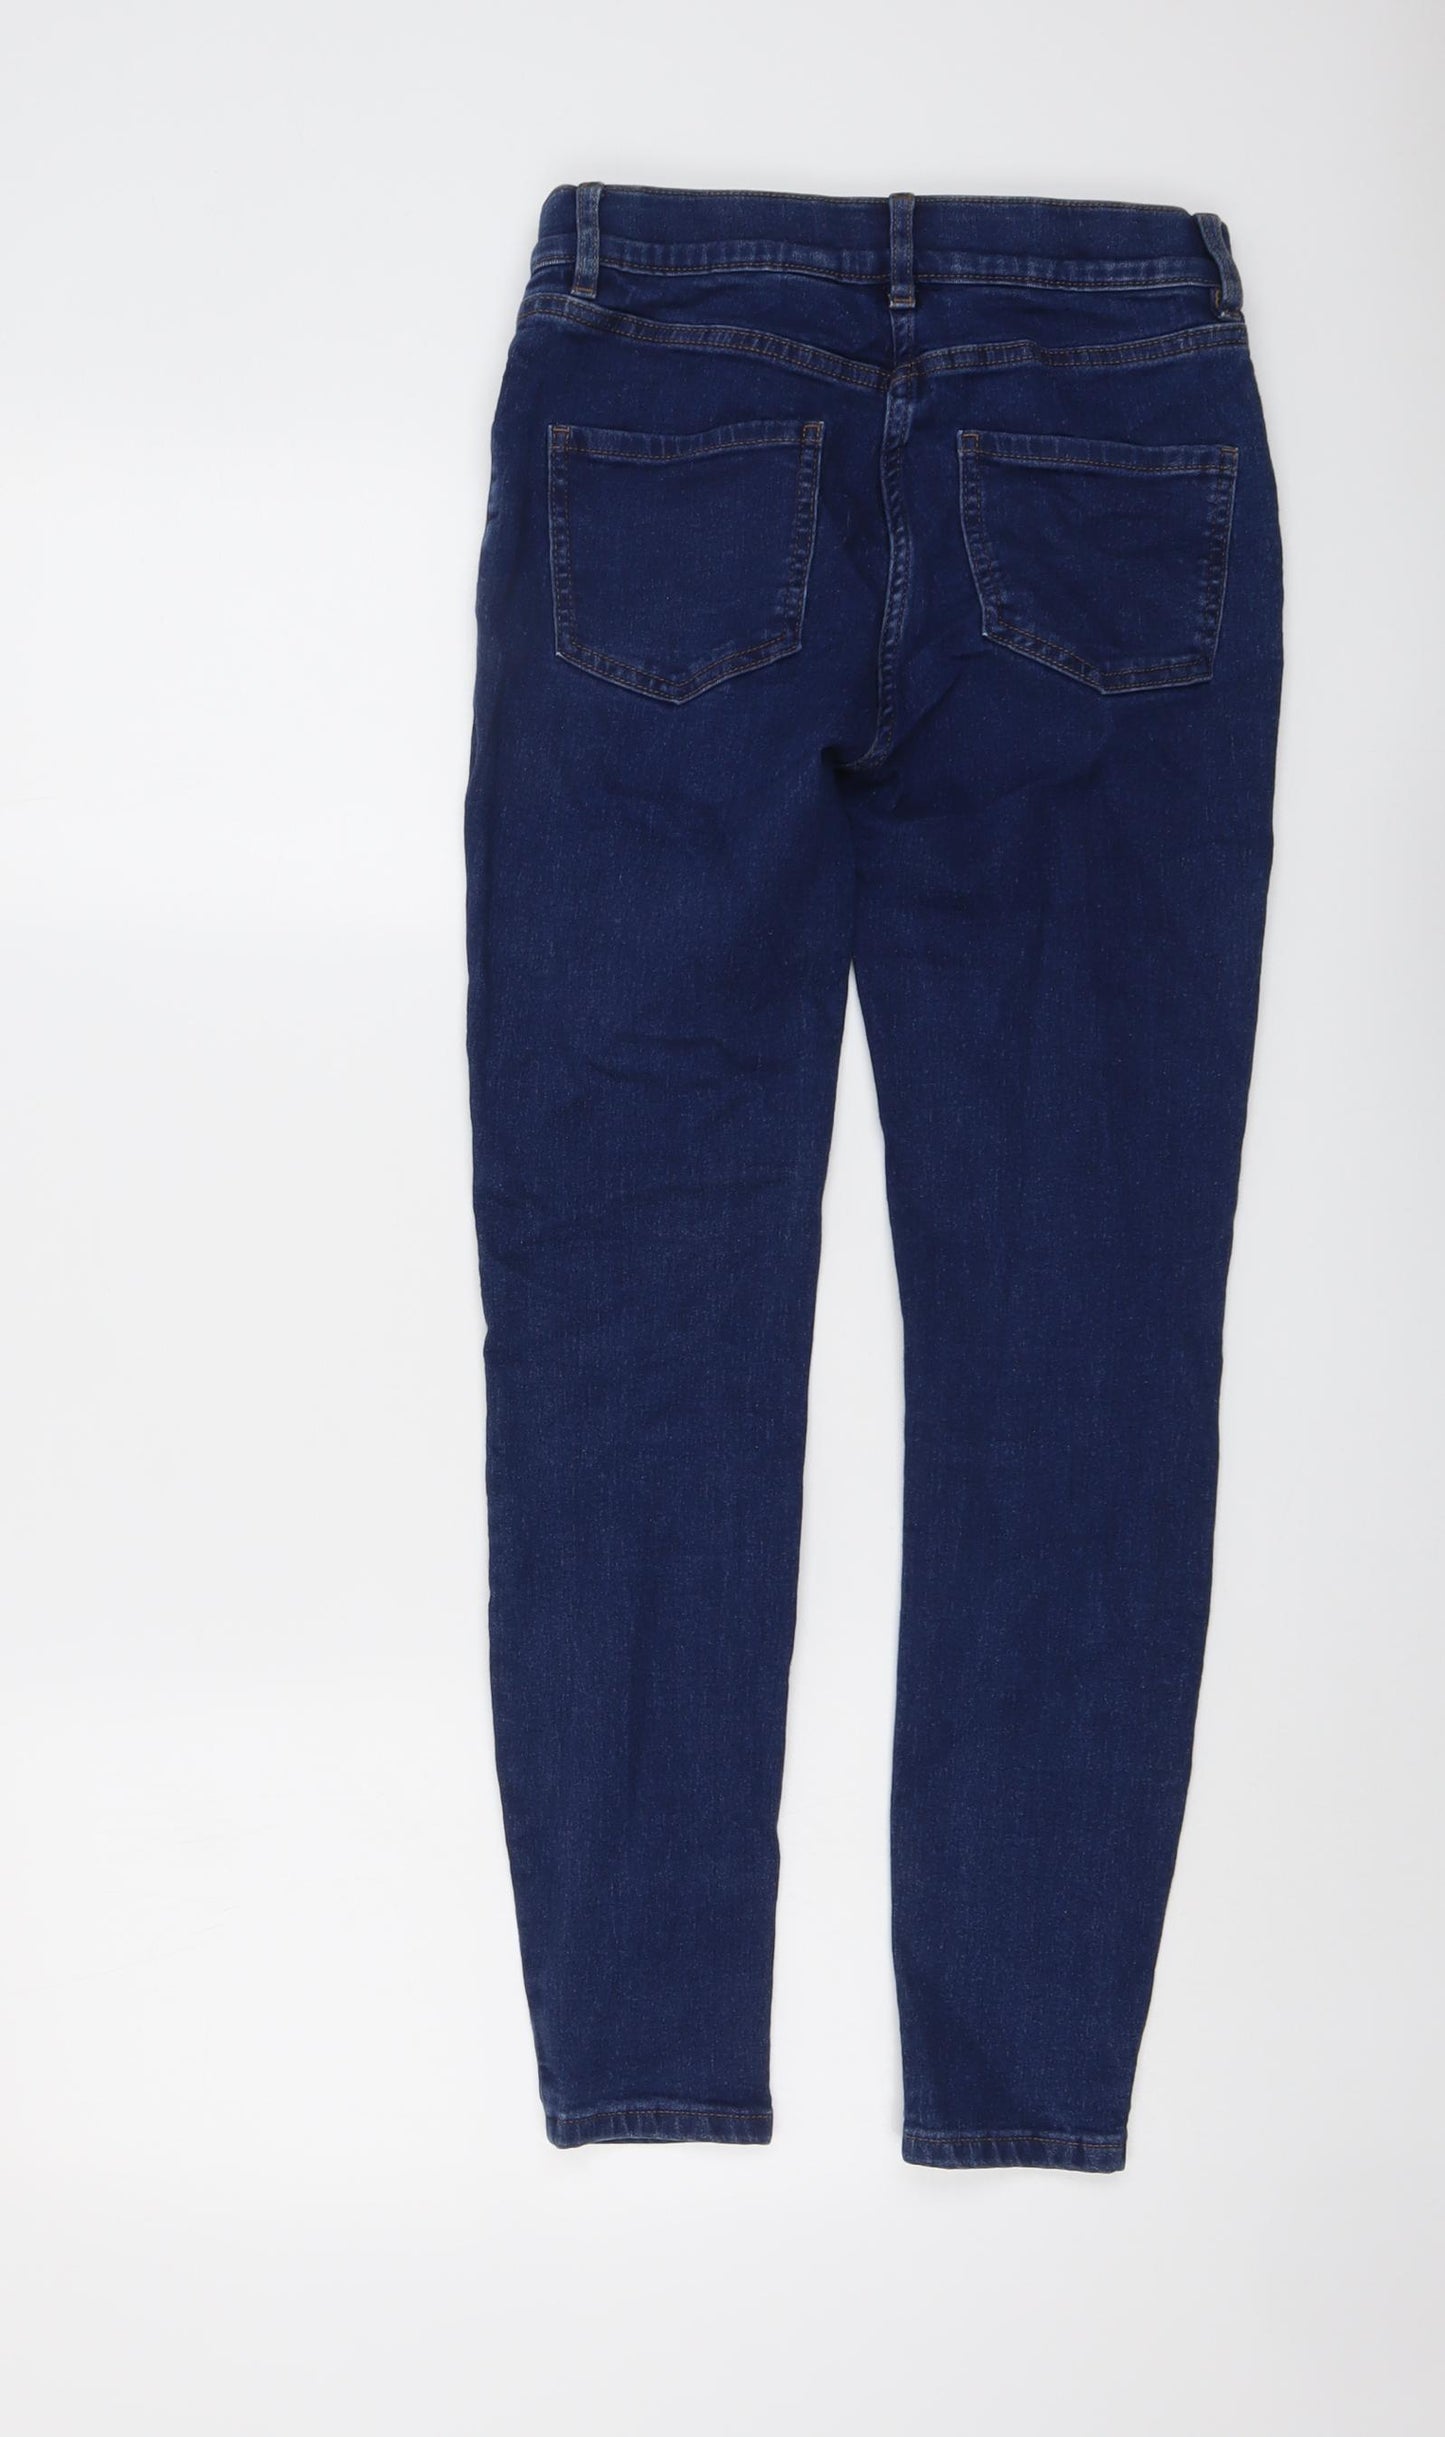 NEXT Womens Blue Cotton Skinny Jeans Size 8 L26 in Regular Button